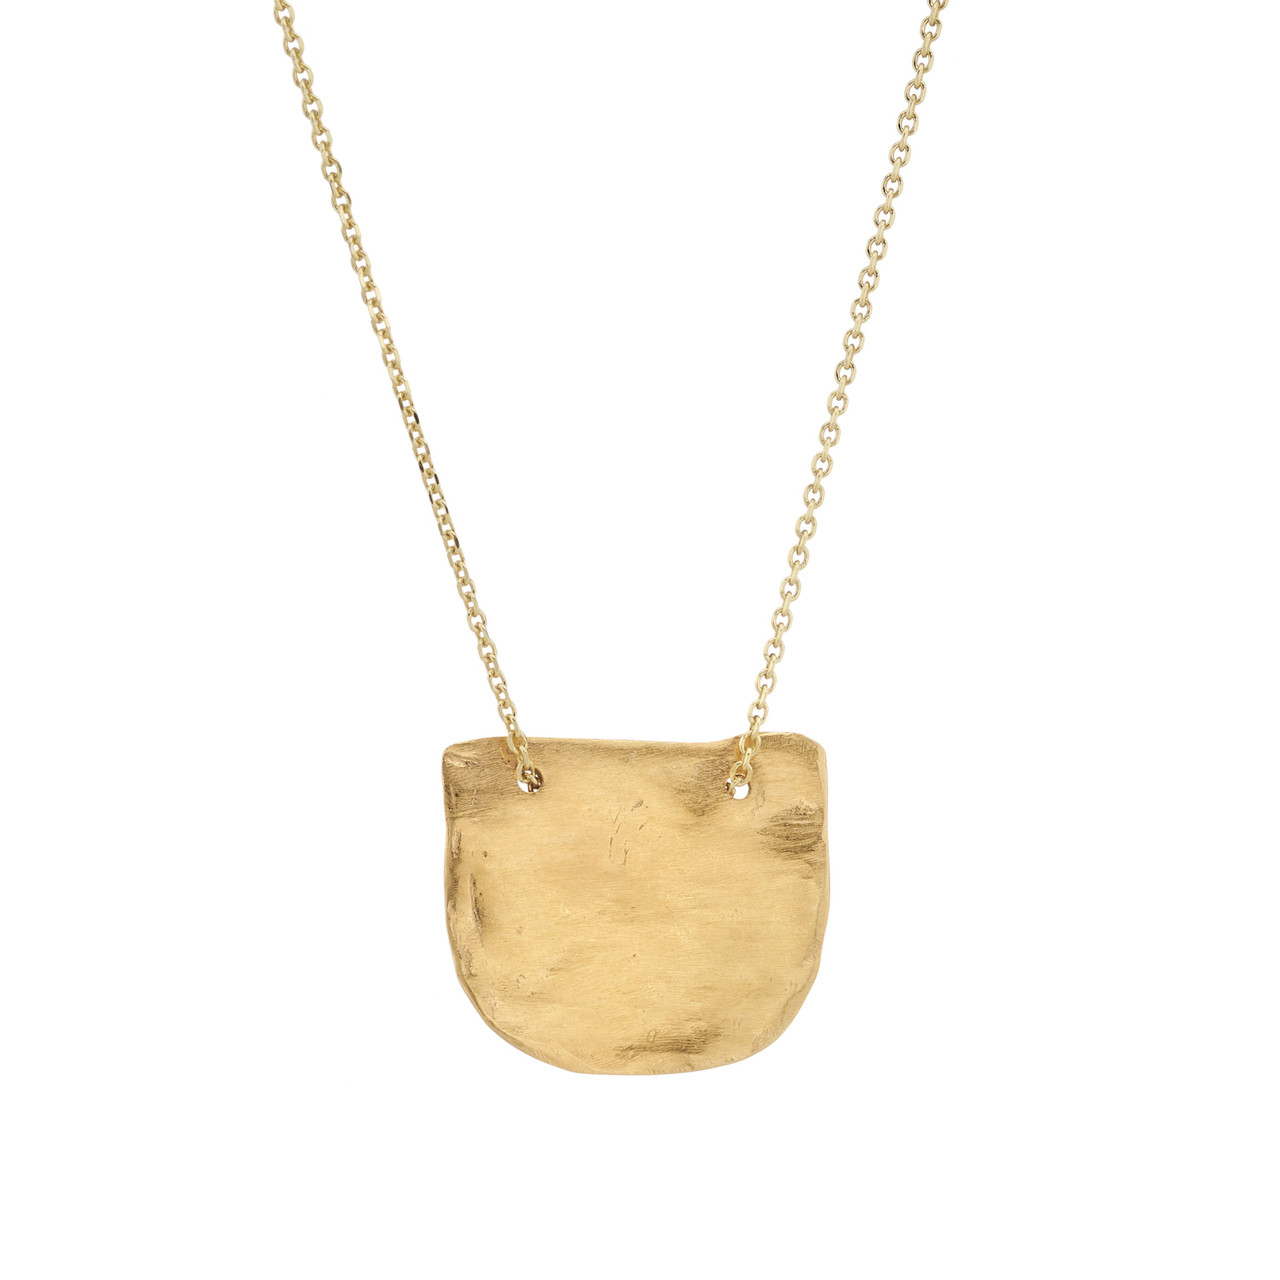 Tomfoolery, Gold Plated Silver Oslo Necklace, Karen Hallam